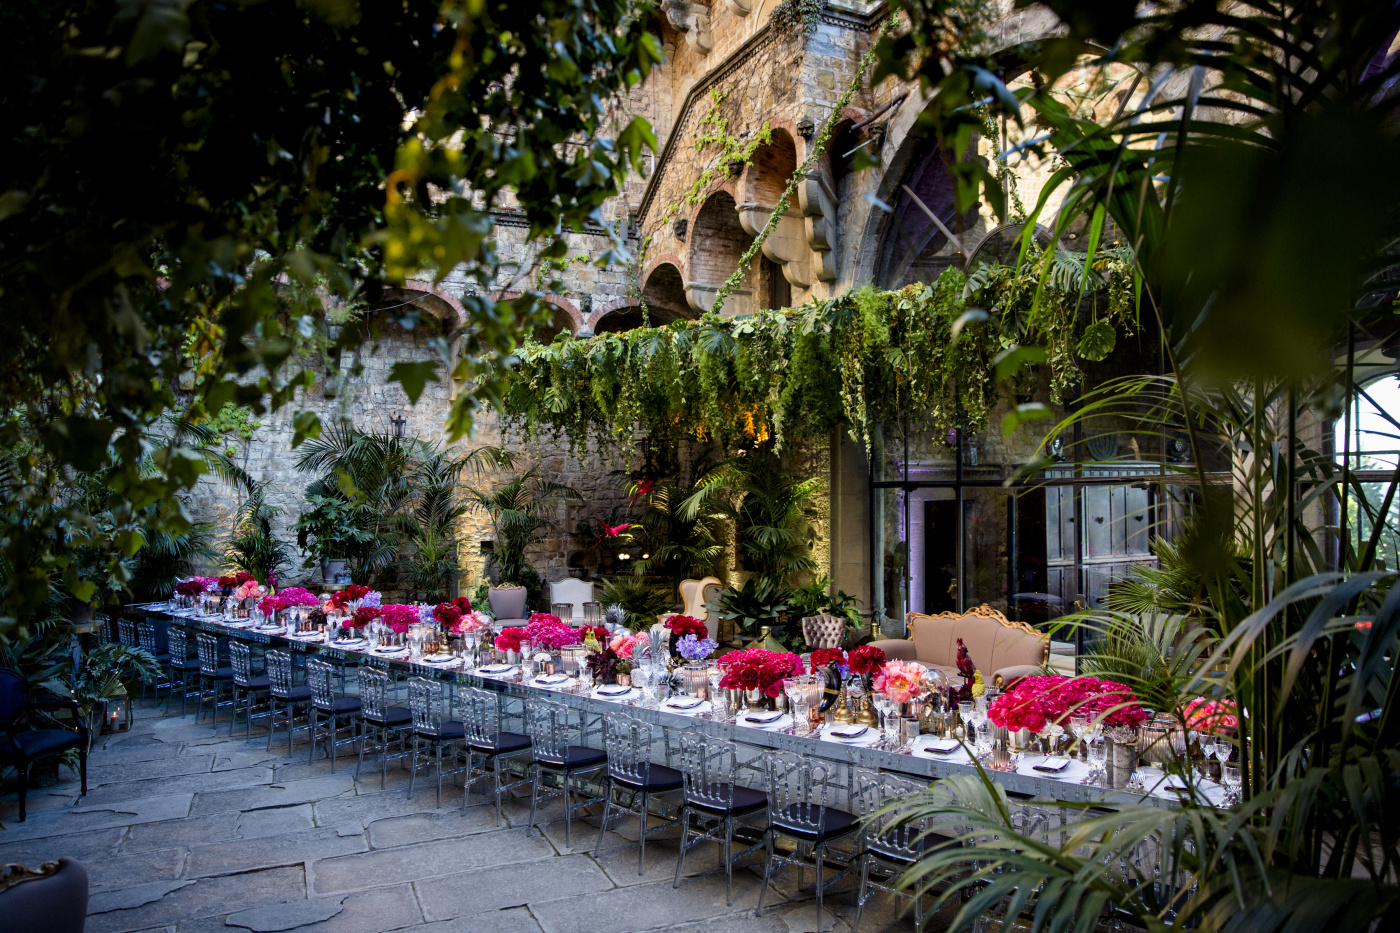 Long mirror table with hanging greenery and red and fuxia flowers